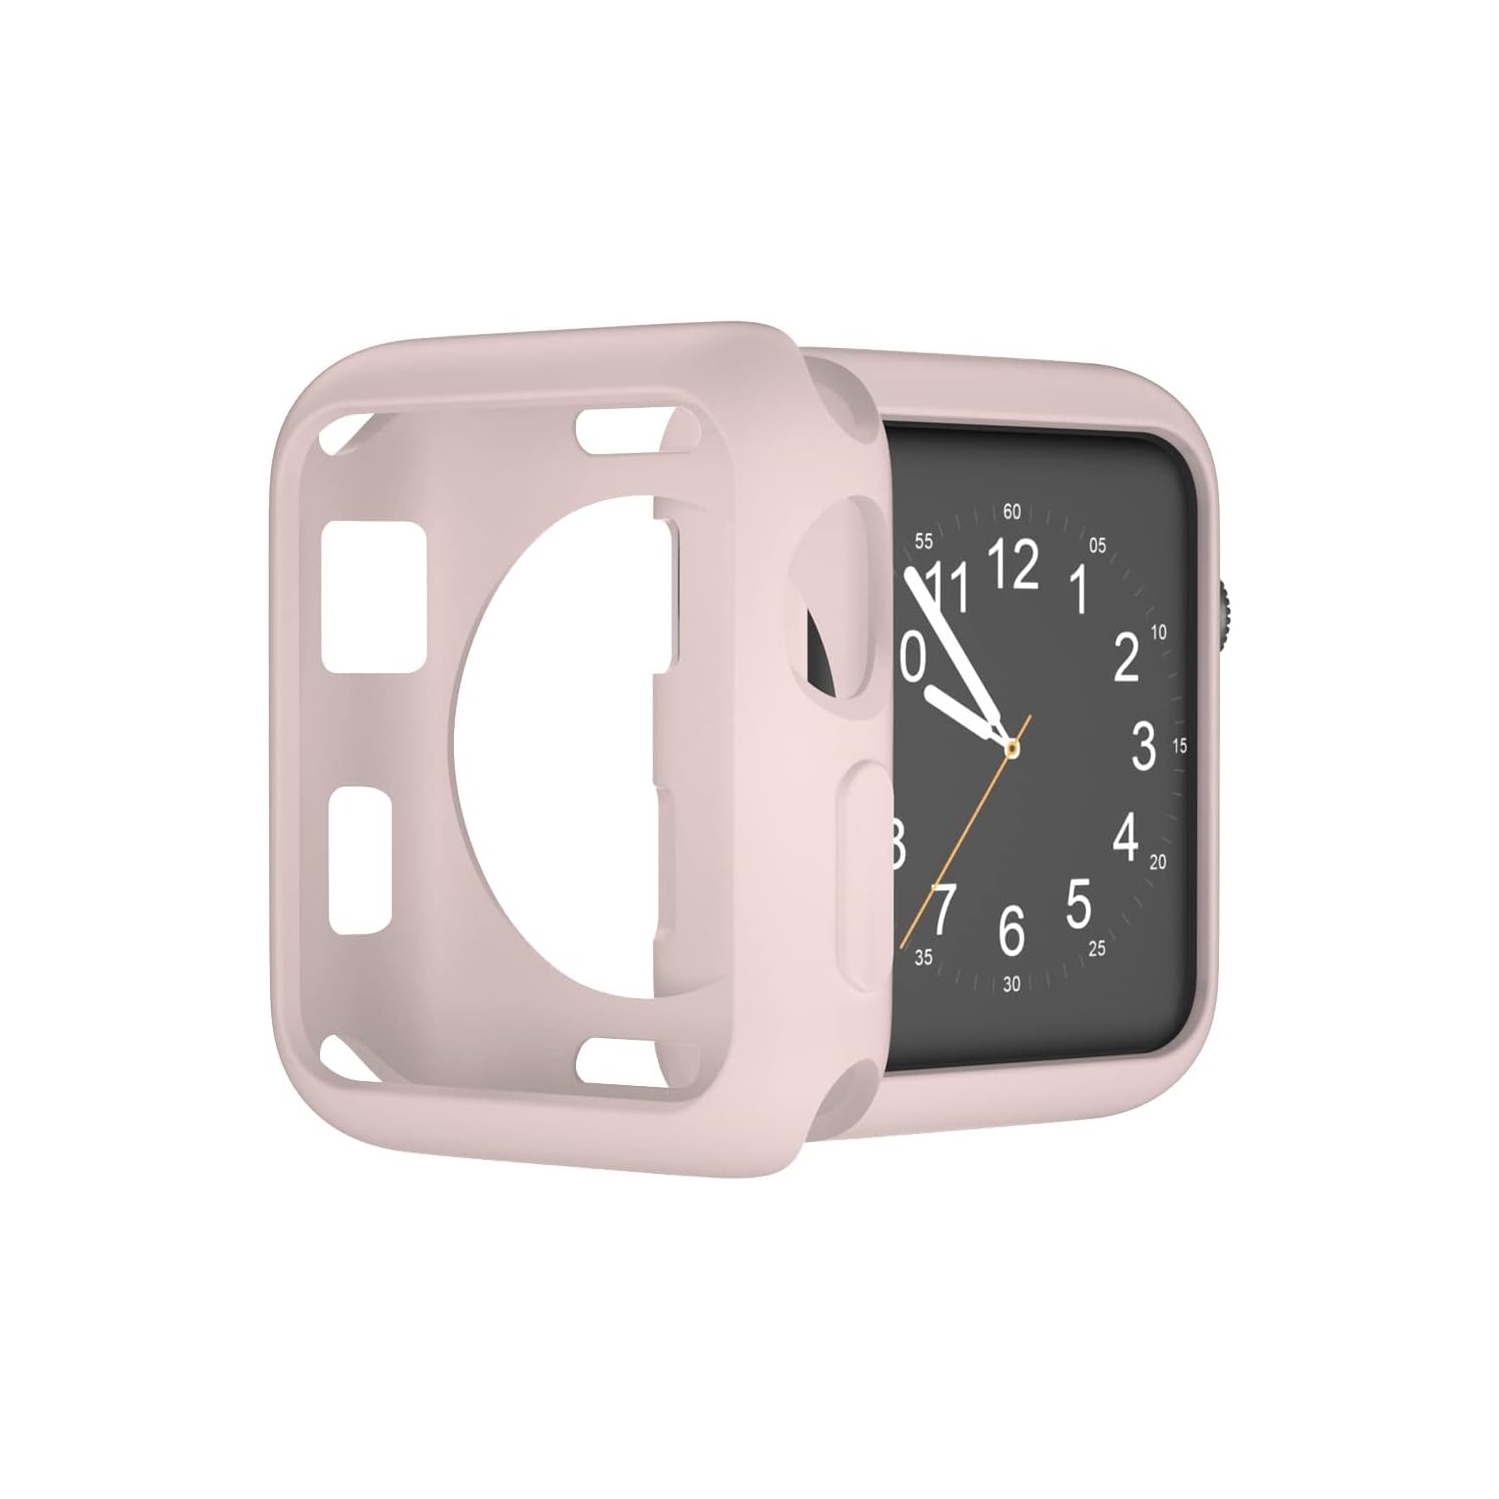 Case Compatible with Apple Watch Series 3/2/1 42MM, Cover Accessories for iWatch 42 MM (Pink)